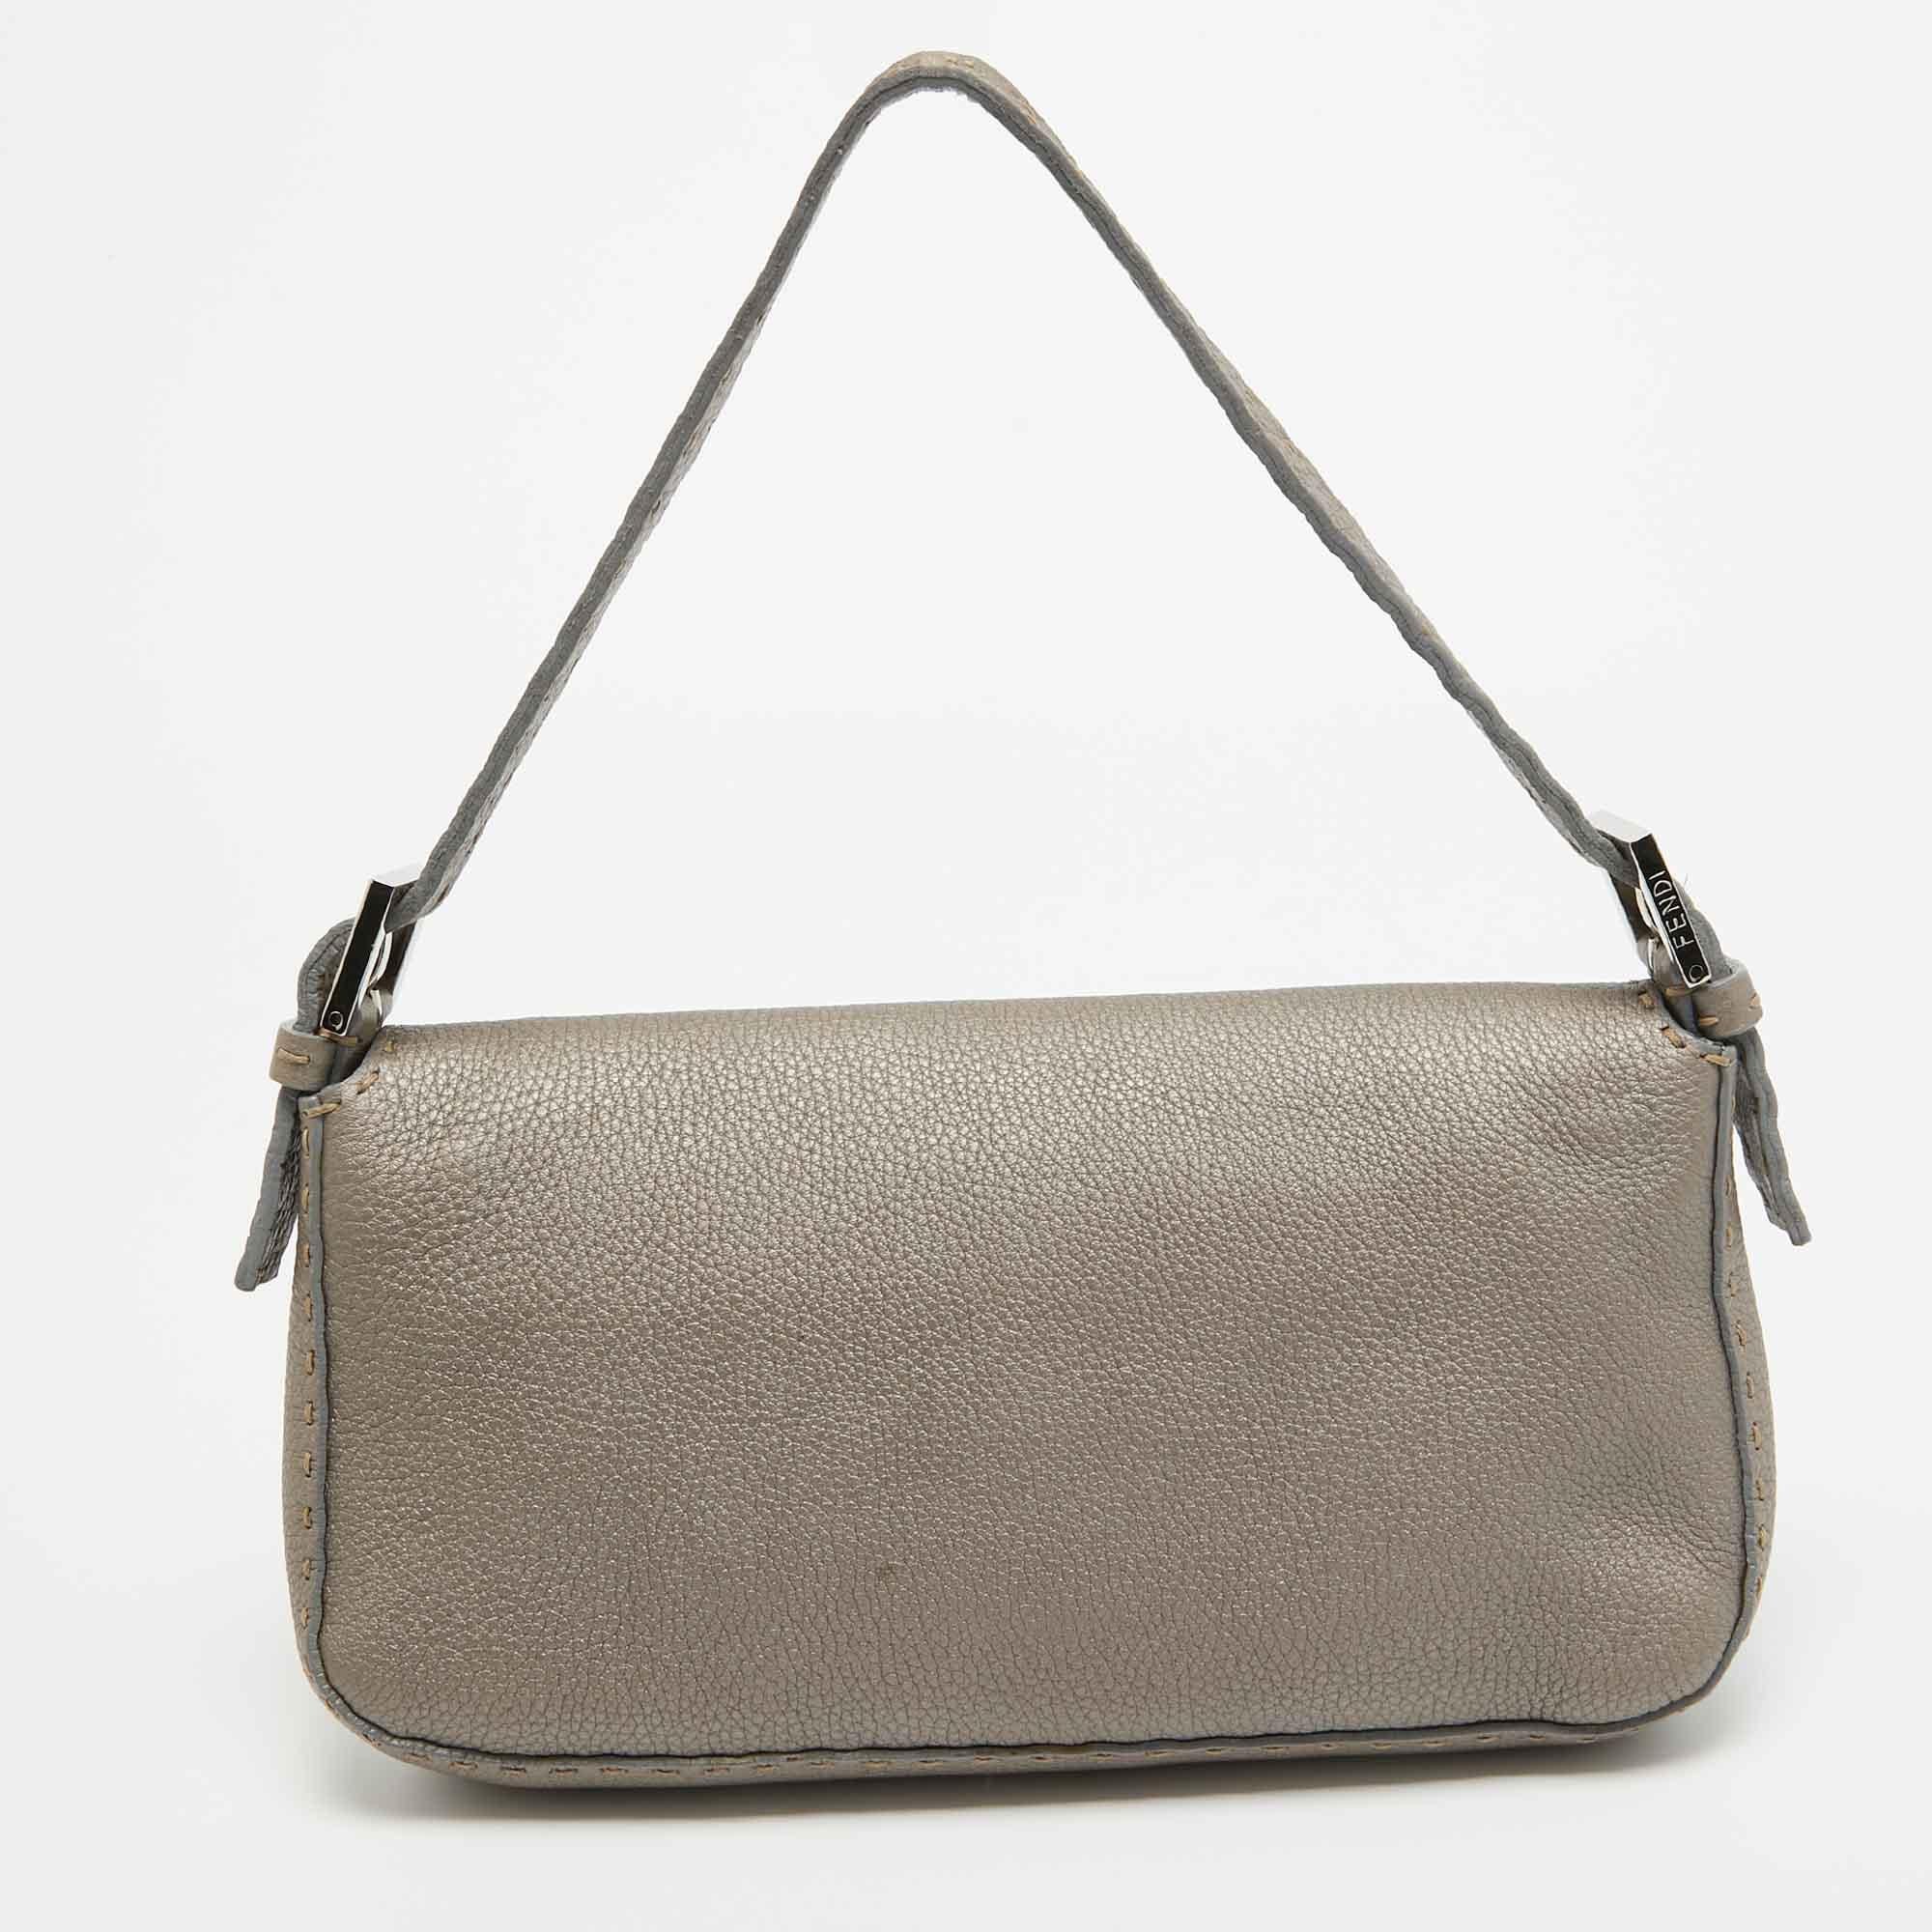 Designer bags are ideal companions for ample occasions! Here we have a fashion-meets-functionality piece crafted with precision. It has been equipped with a well-sized interior that can easily fit all your essentials.

Includes: Original Dustbag

